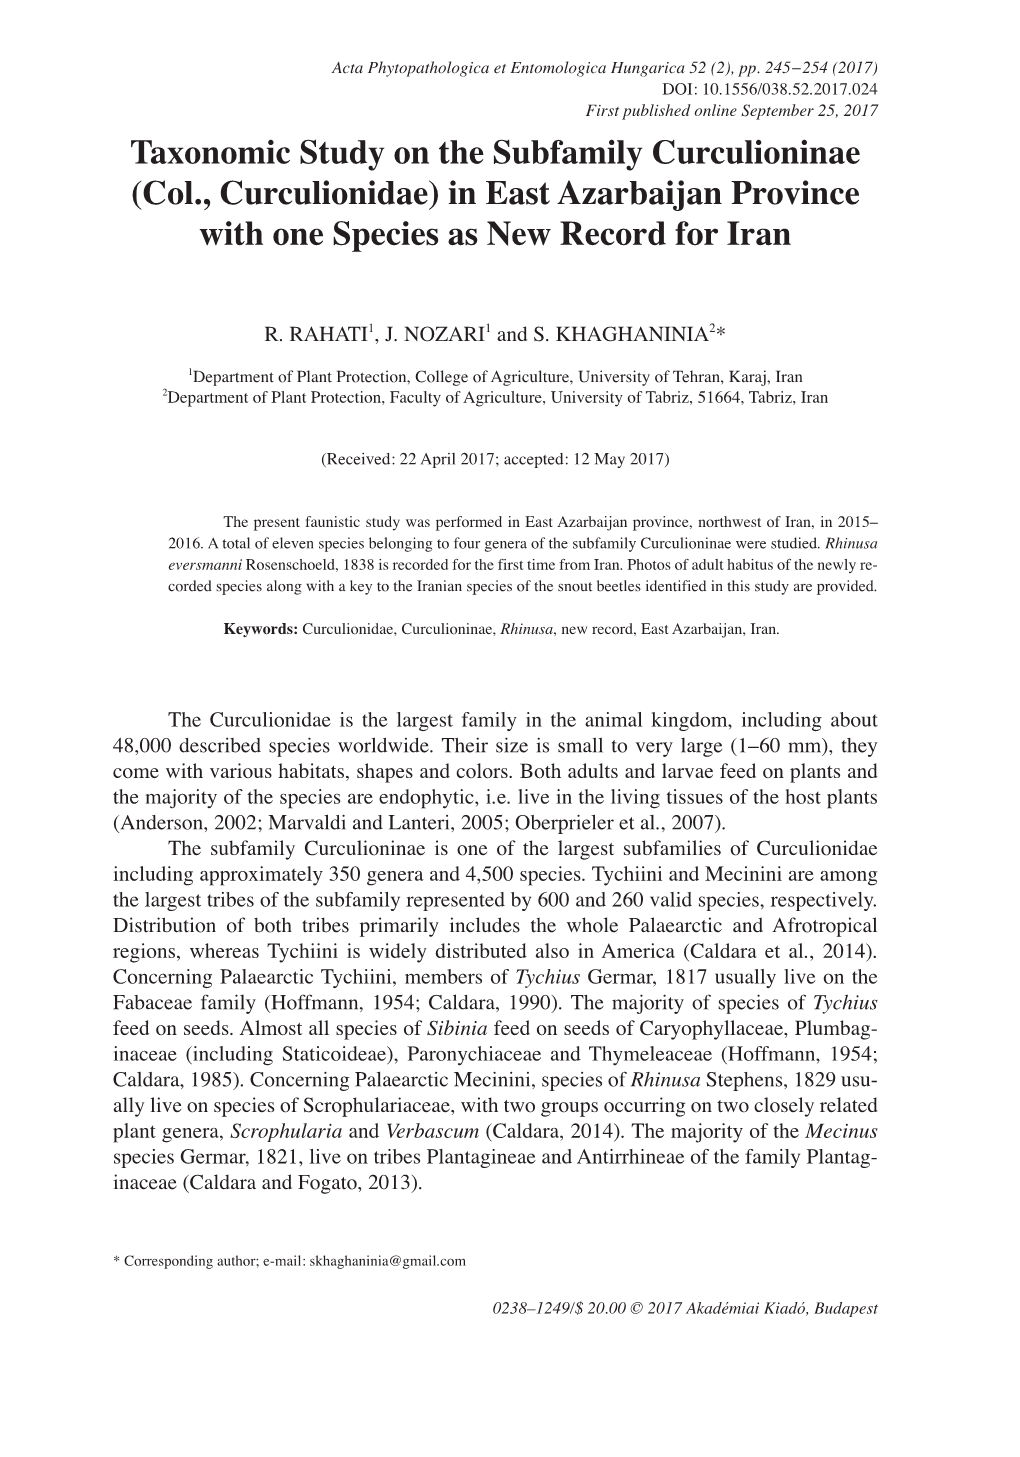 Taxonomic Study on the Subfamily Curculioninae (Col., Curculionidae) in East Azarbaijan Province with One Species As New Record for Iran